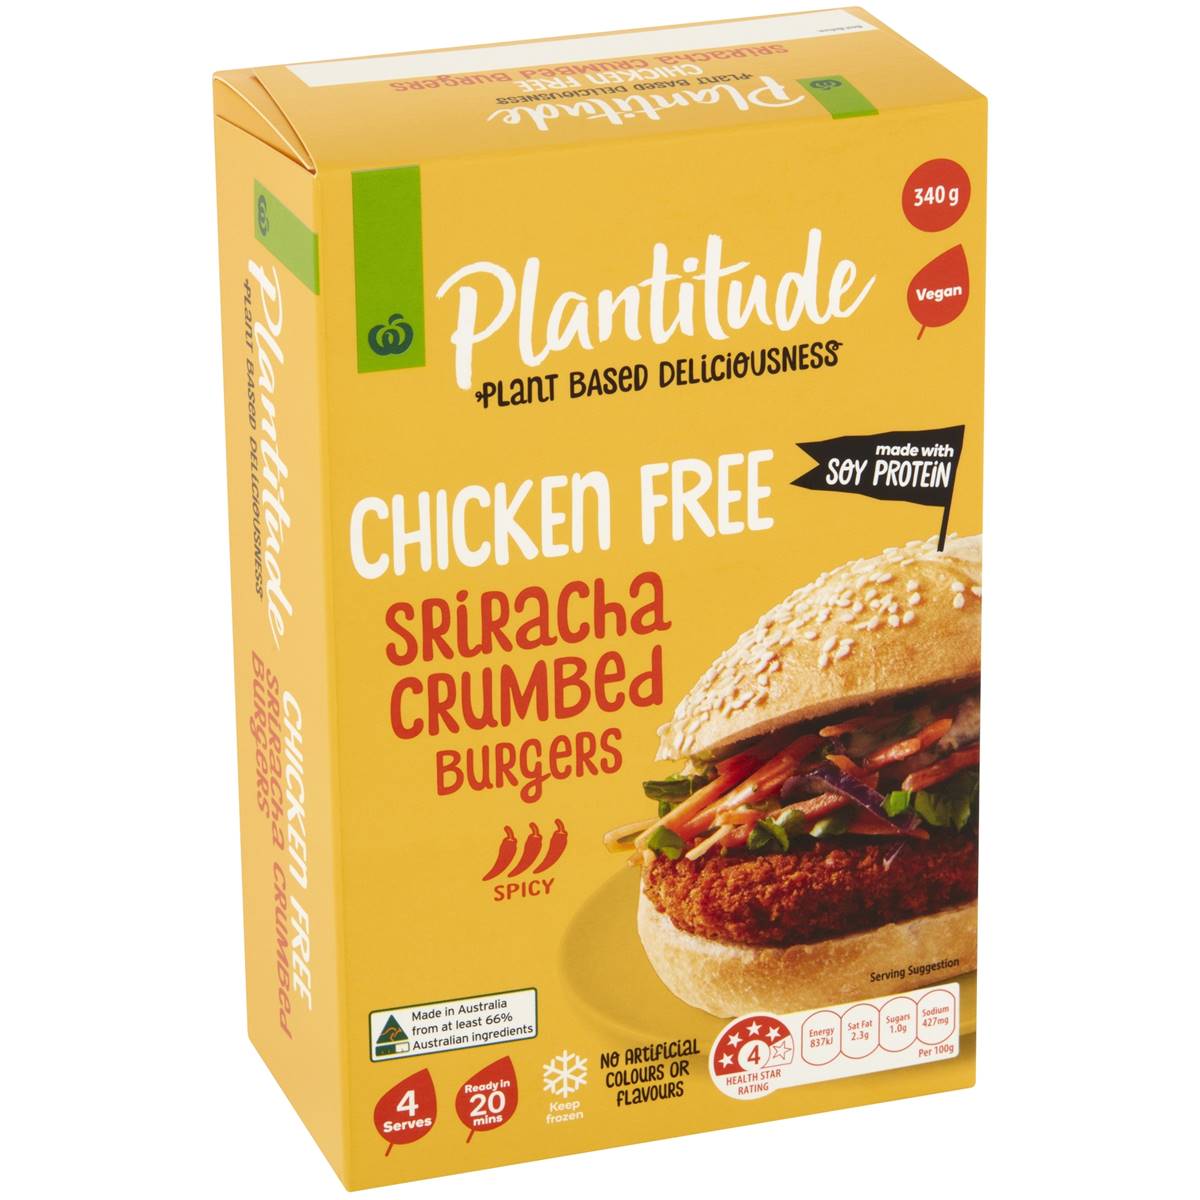 Calories in Woolworths Plantitude Chicken Free Sriracha Crumbed Burgers Spicy